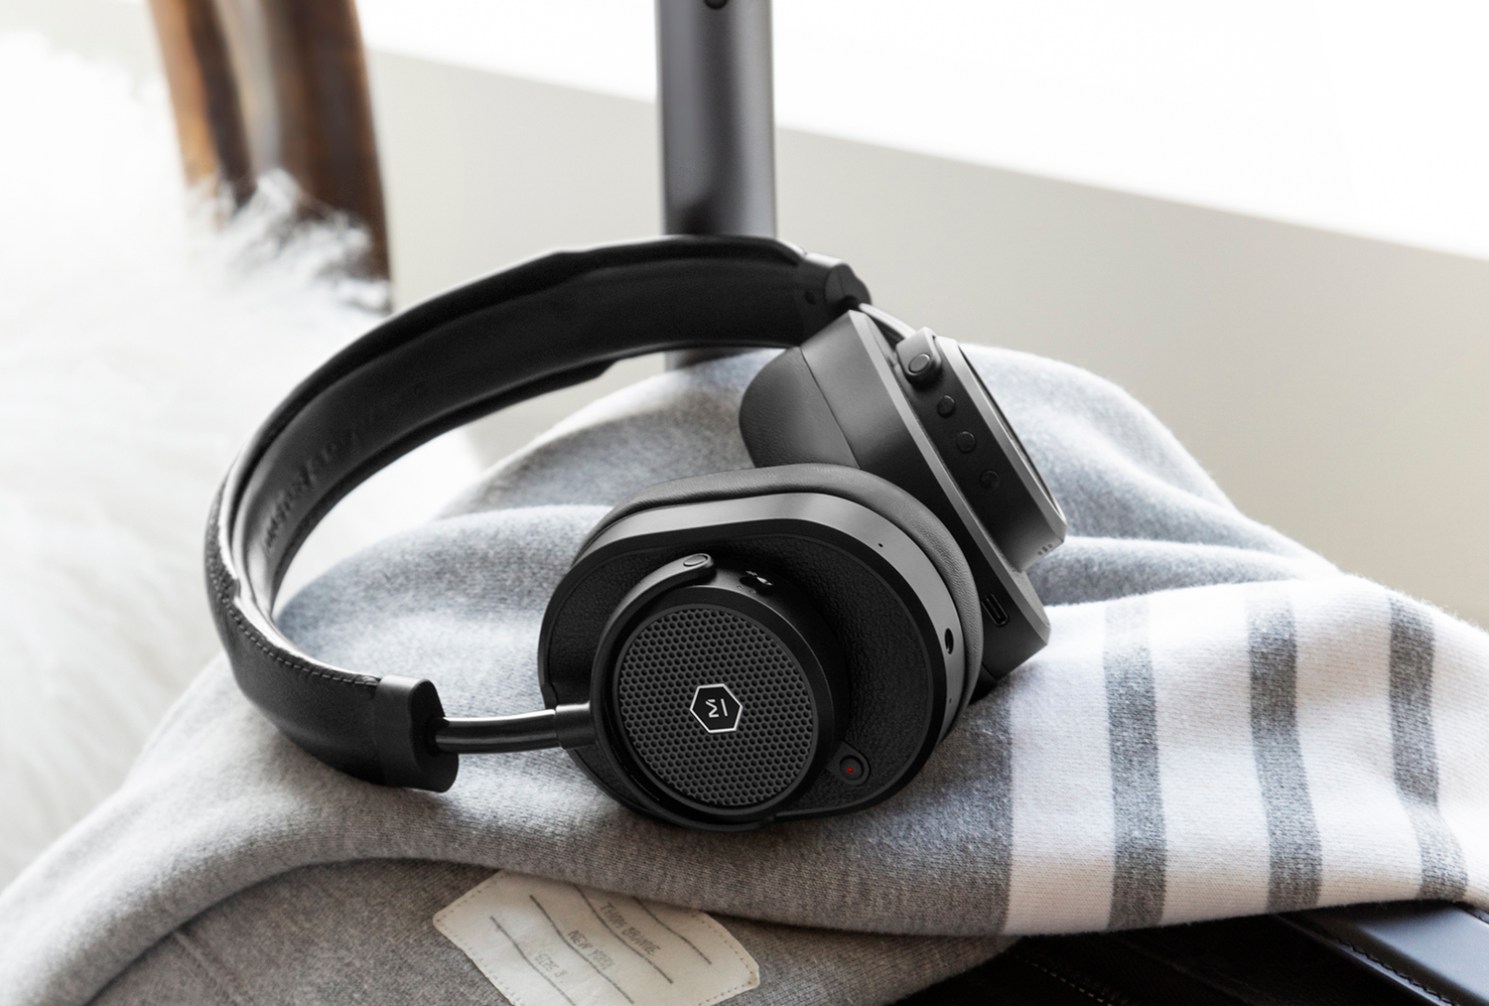 The MW65 Active Noise-Cancelling Wireless Headphones, now in Black Metal/Black Leather